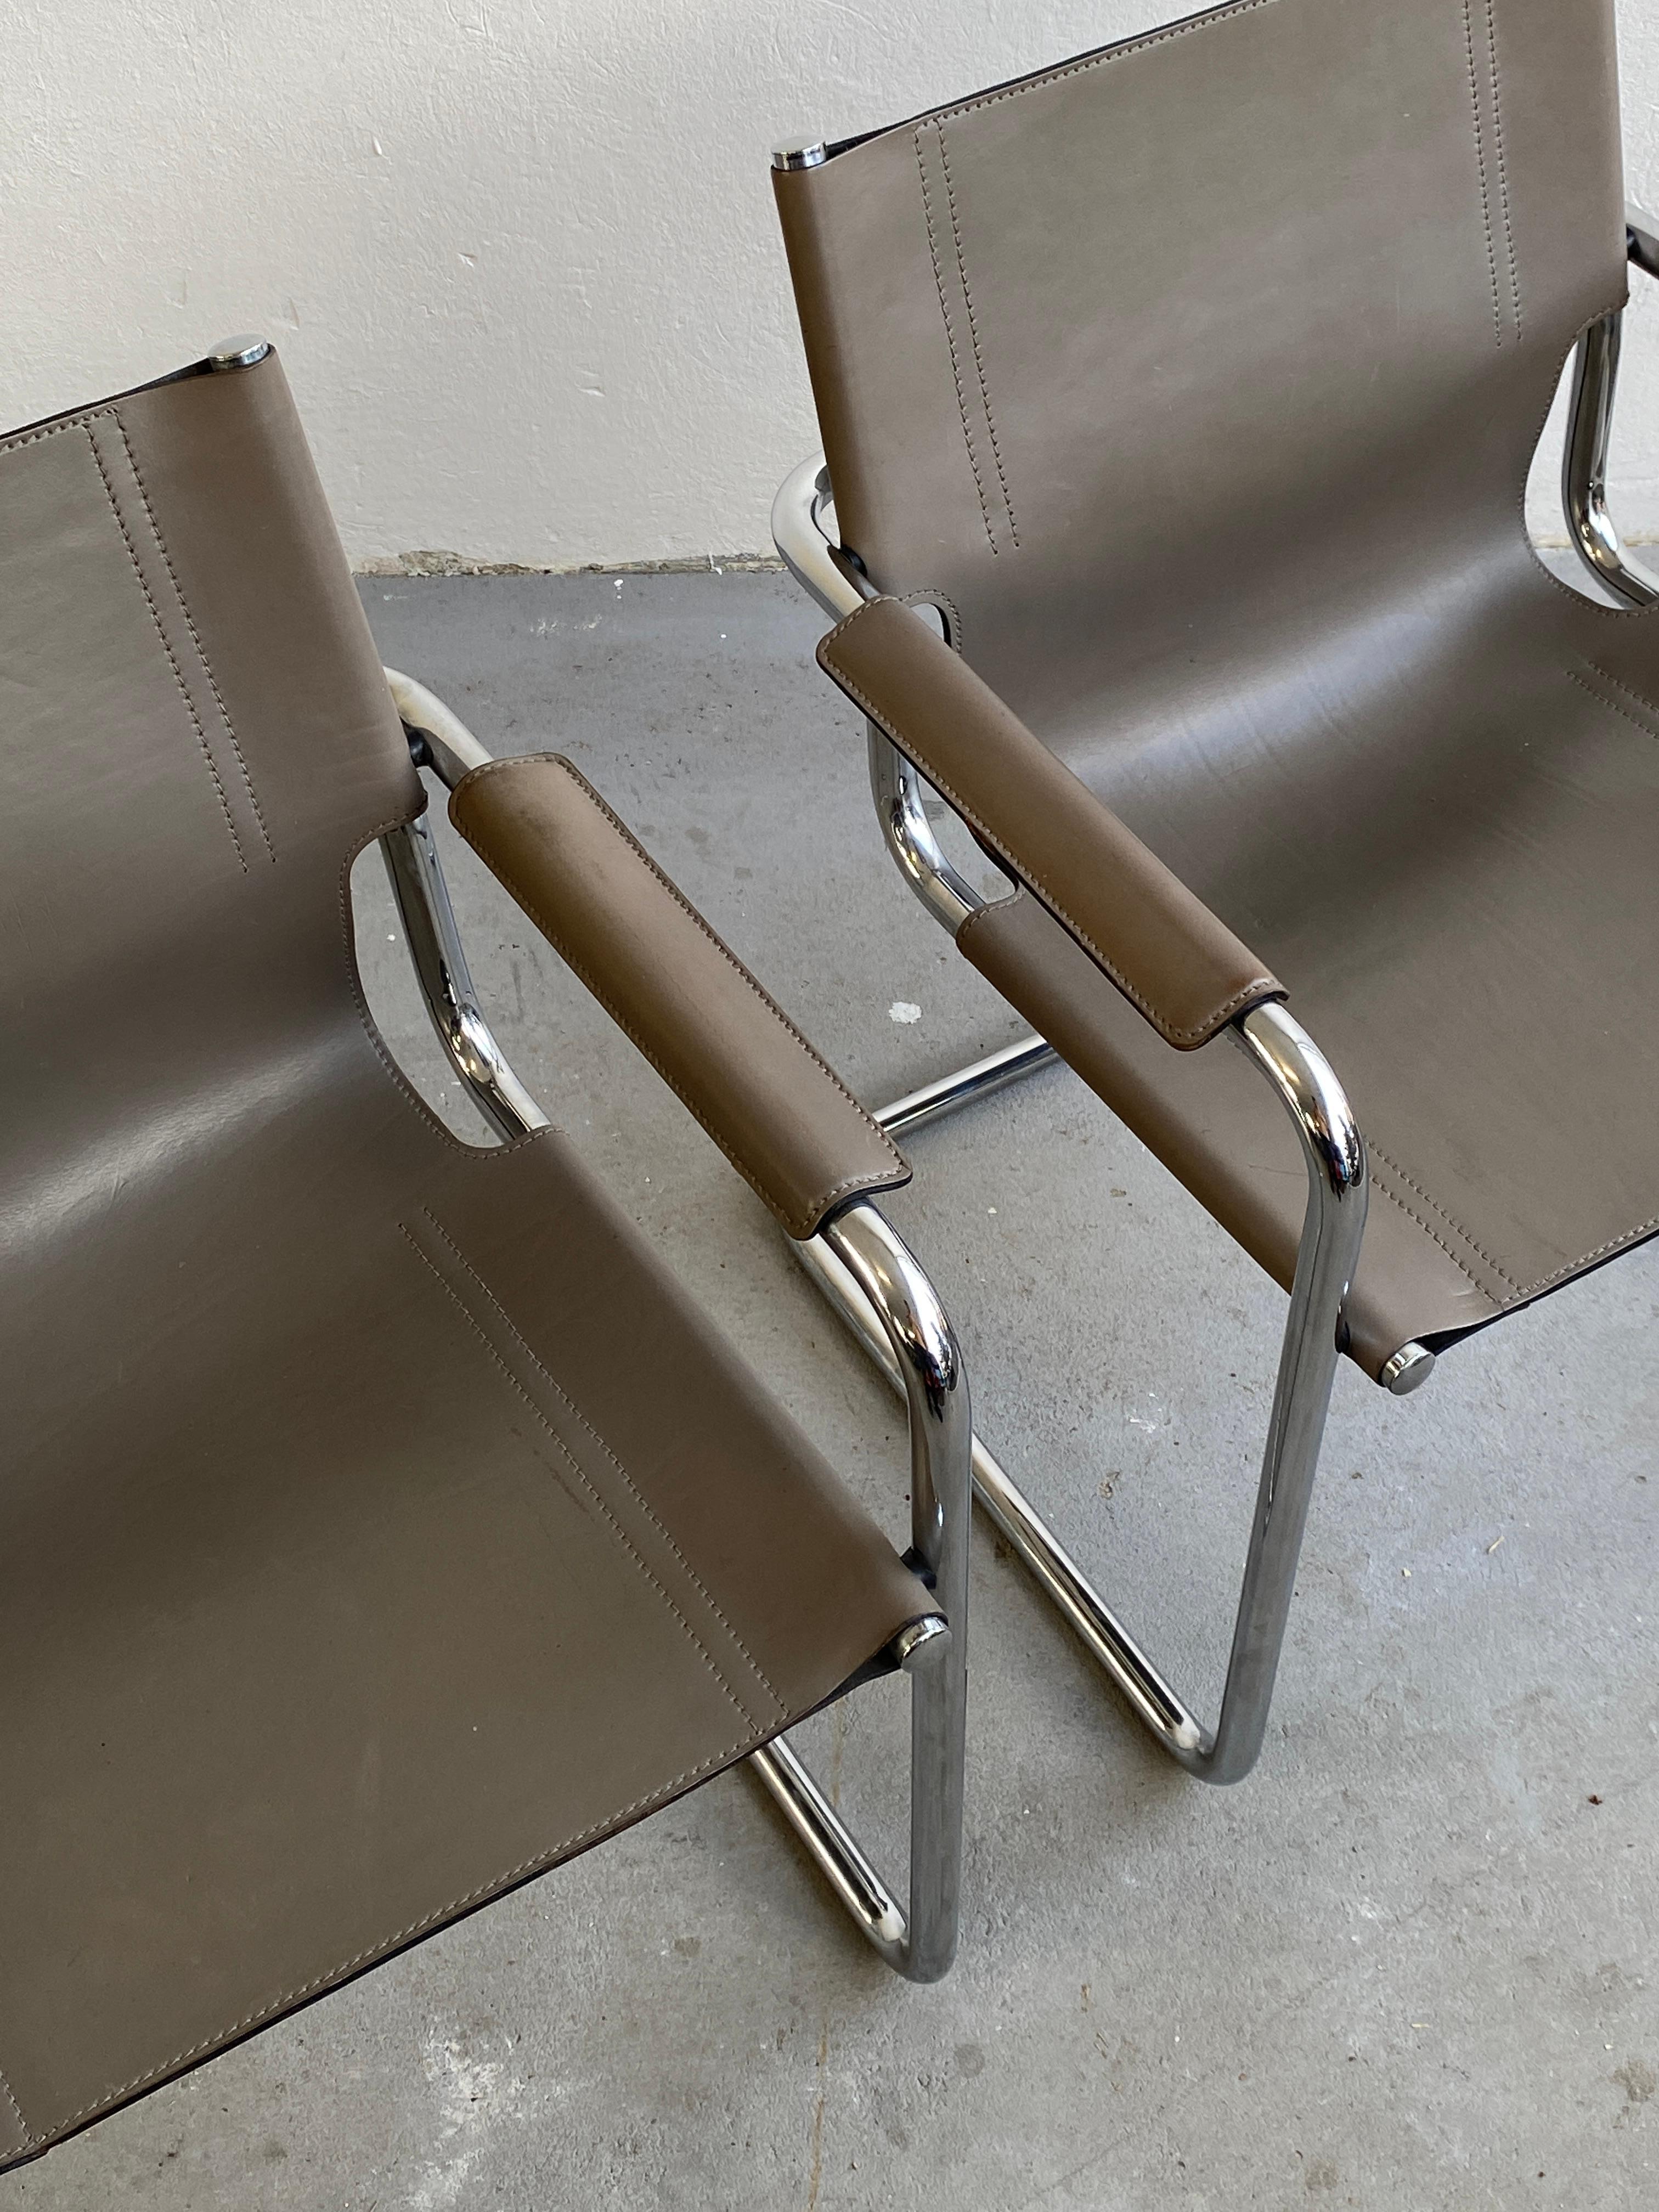 Vintage Leather Cantilever Chairs, Centro Studi for Matteo Grassi, 1980s Italy 12